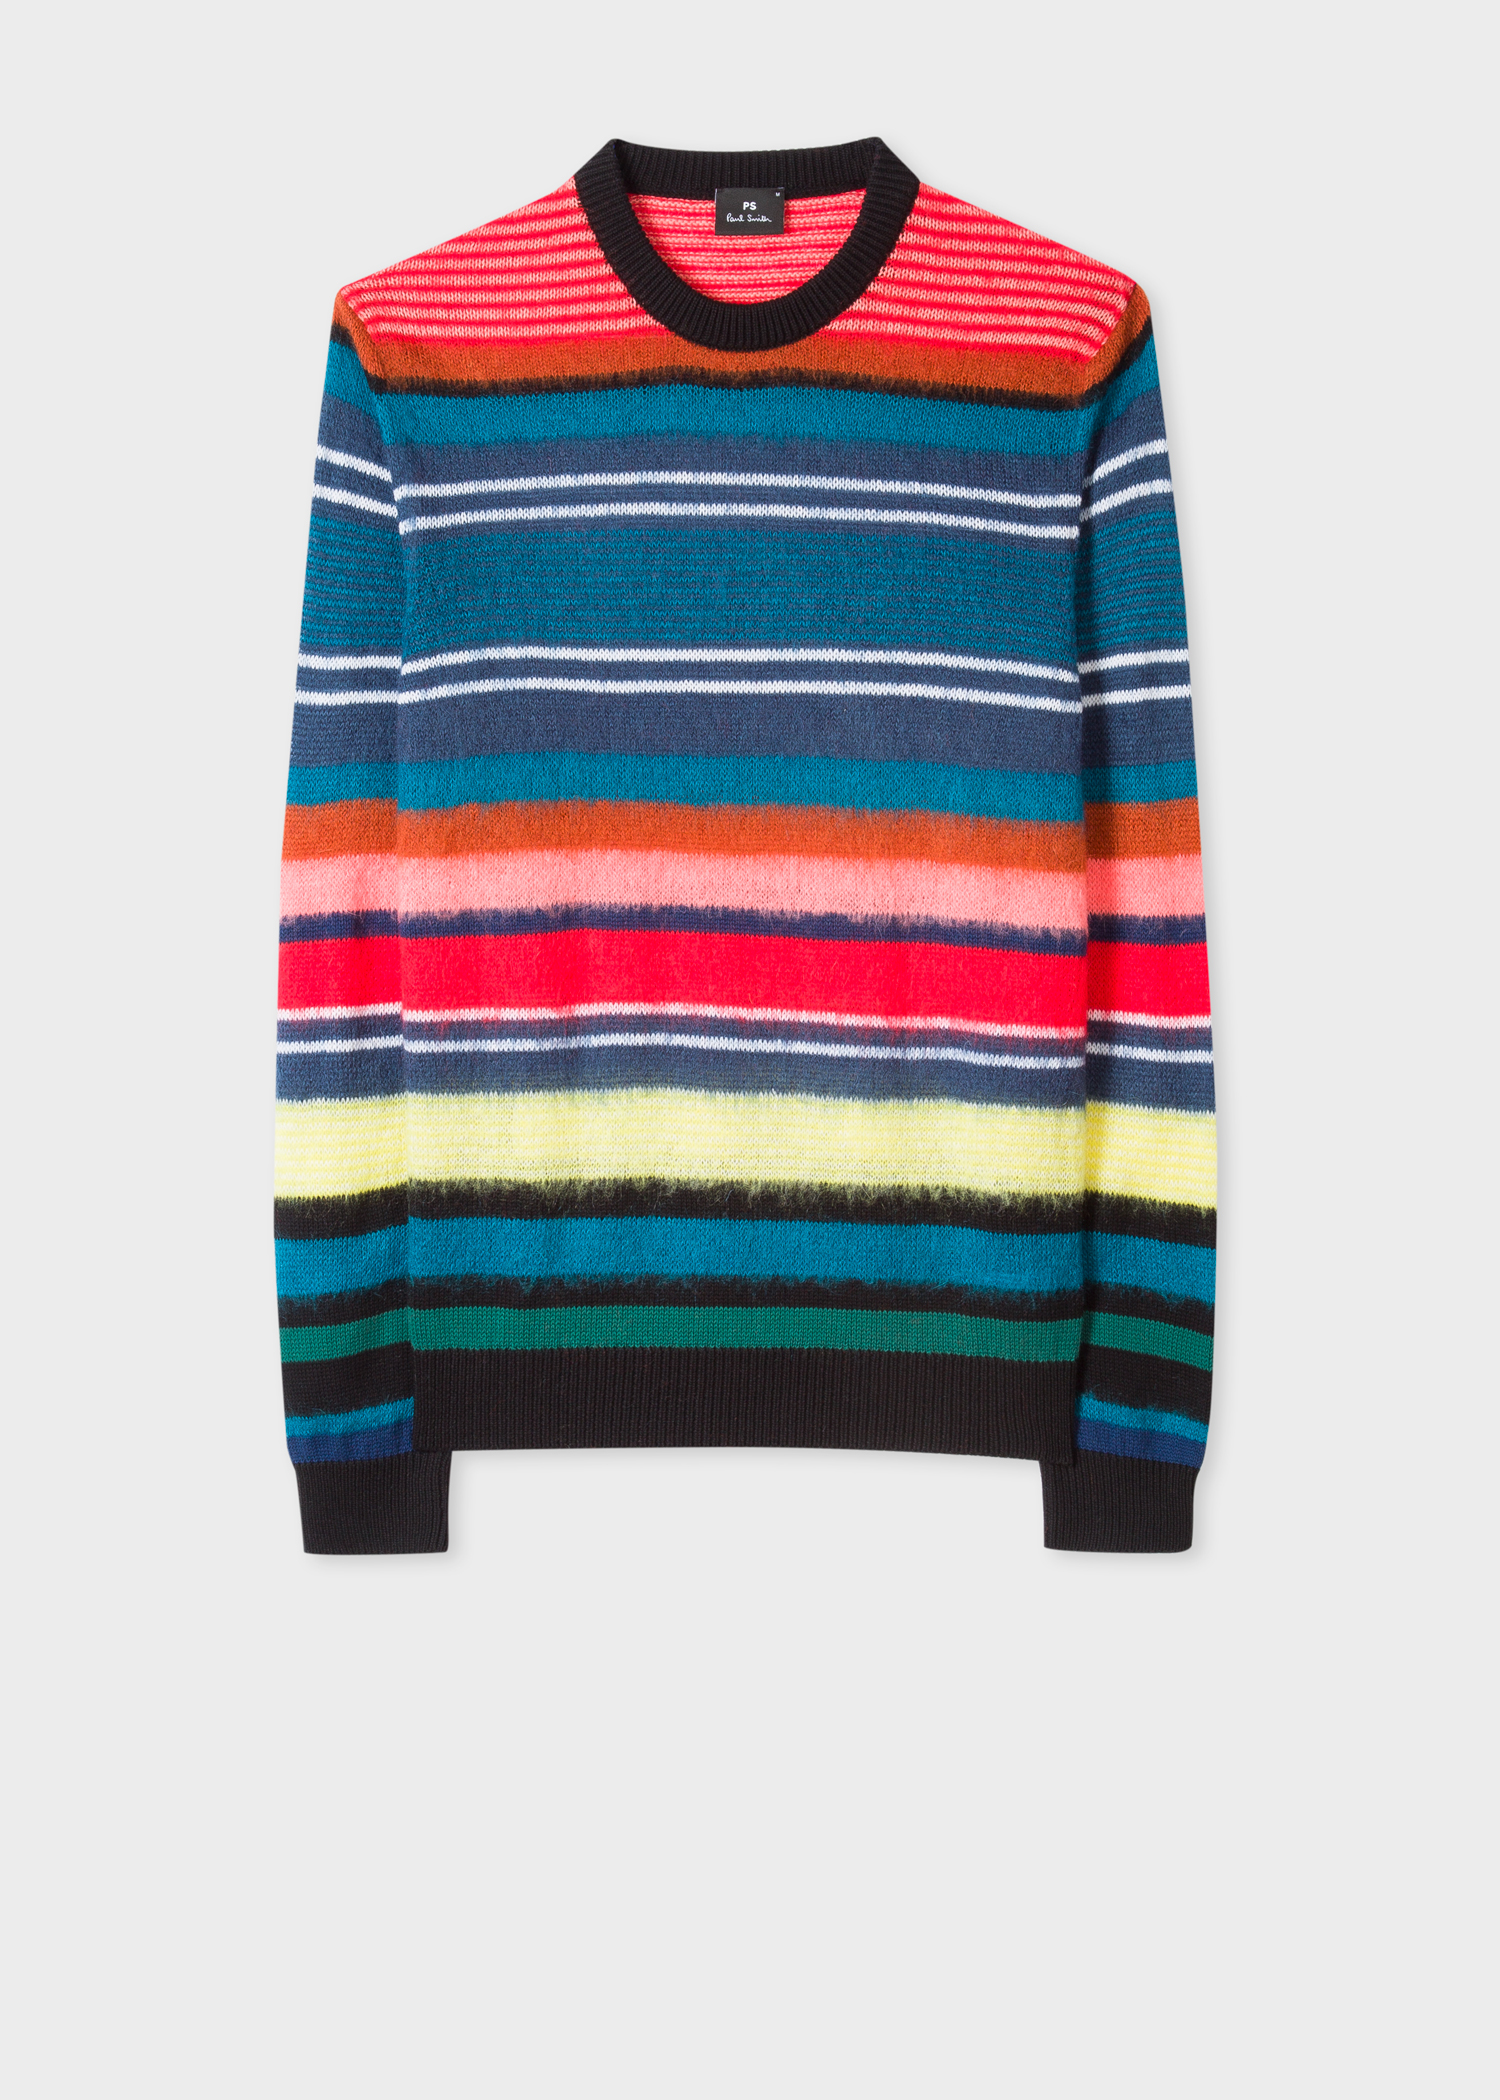 Front view - Men's Multi-Colour Striped Wool-Blend Sweater Paul Smith